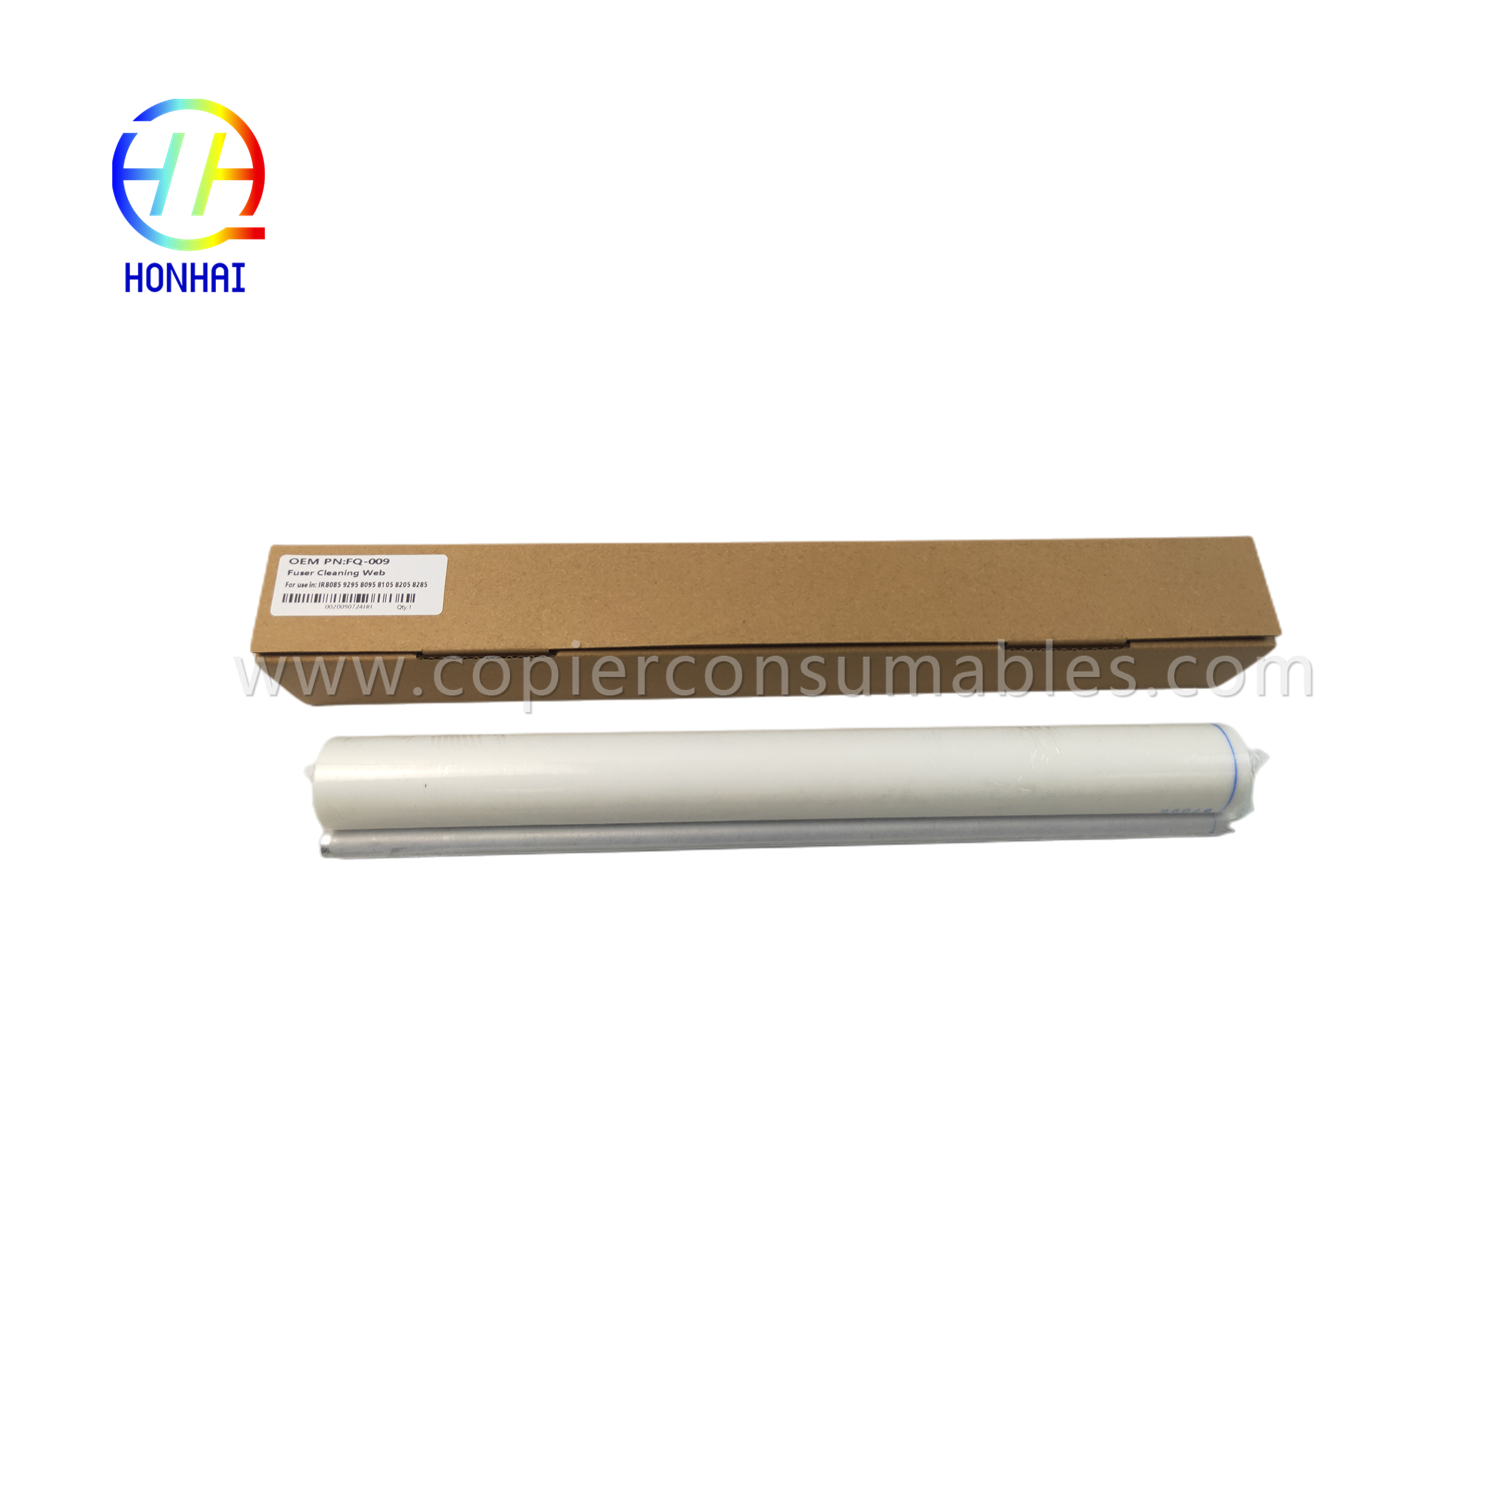 https://c585.goodao.net/fuser-cleaning-web-for-canon-ir6800-ir-8085-8095-8105-8205-8285-8295-fq-009-fc5-2286-000-oem-fuser- καθαρισμός-fuser-roller-product/